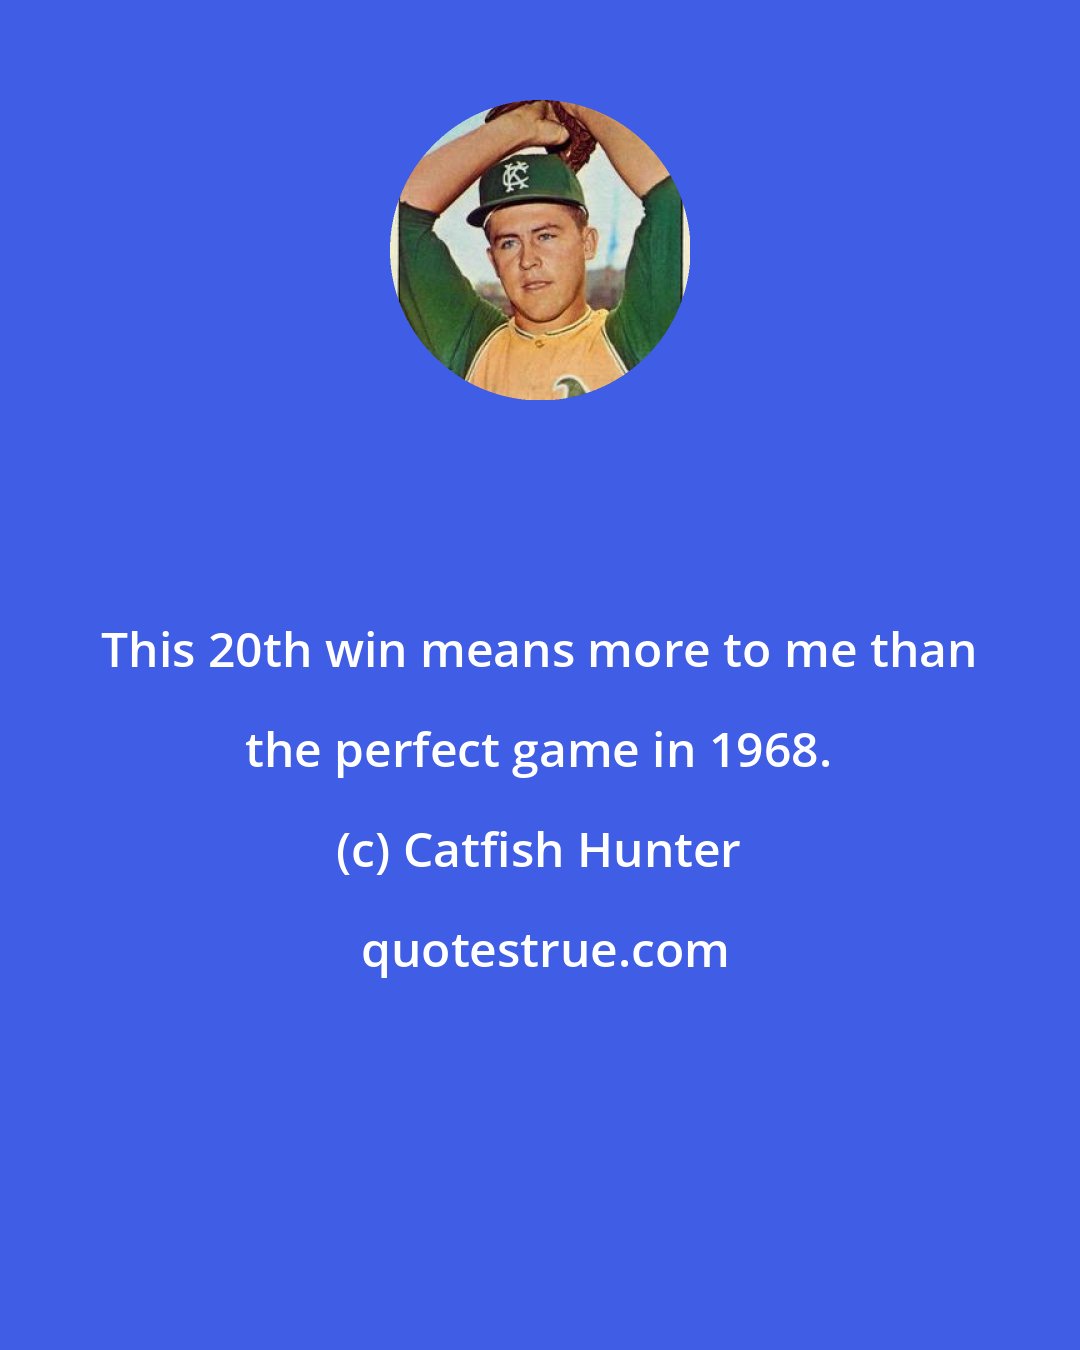 Catfish Hunter: This 20th win means more to me than the perfect game in 1968.